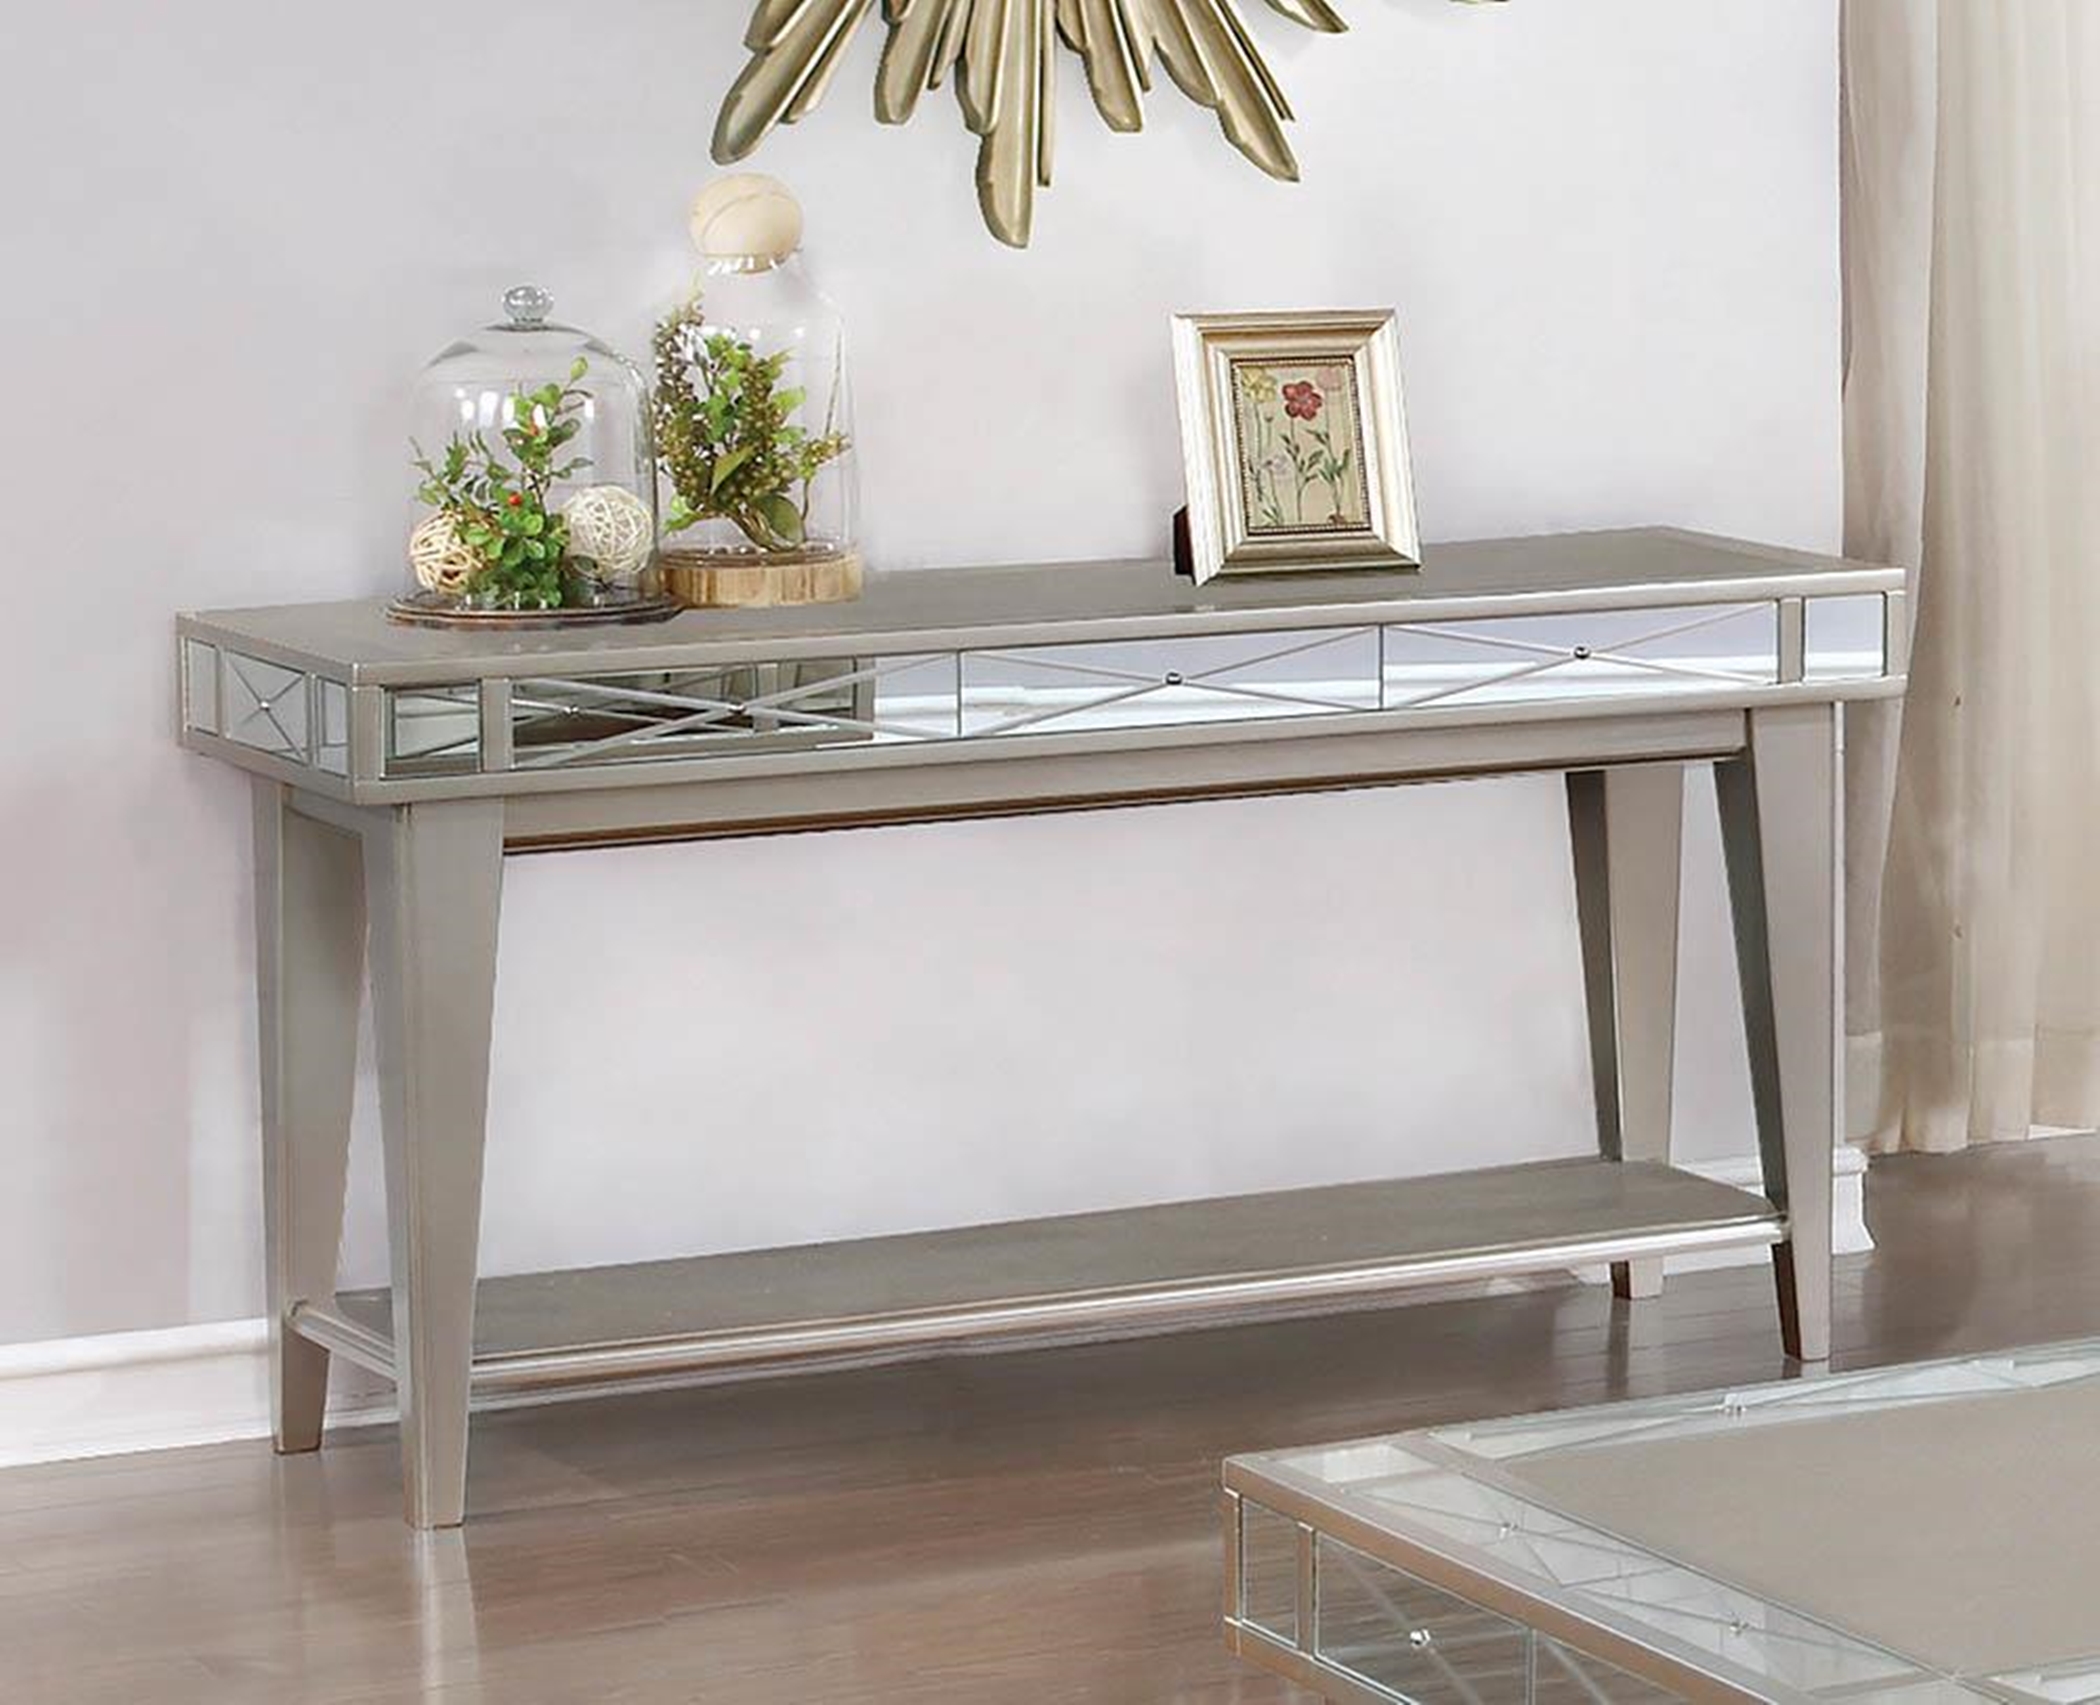 Bling Mirrored Sofa Table